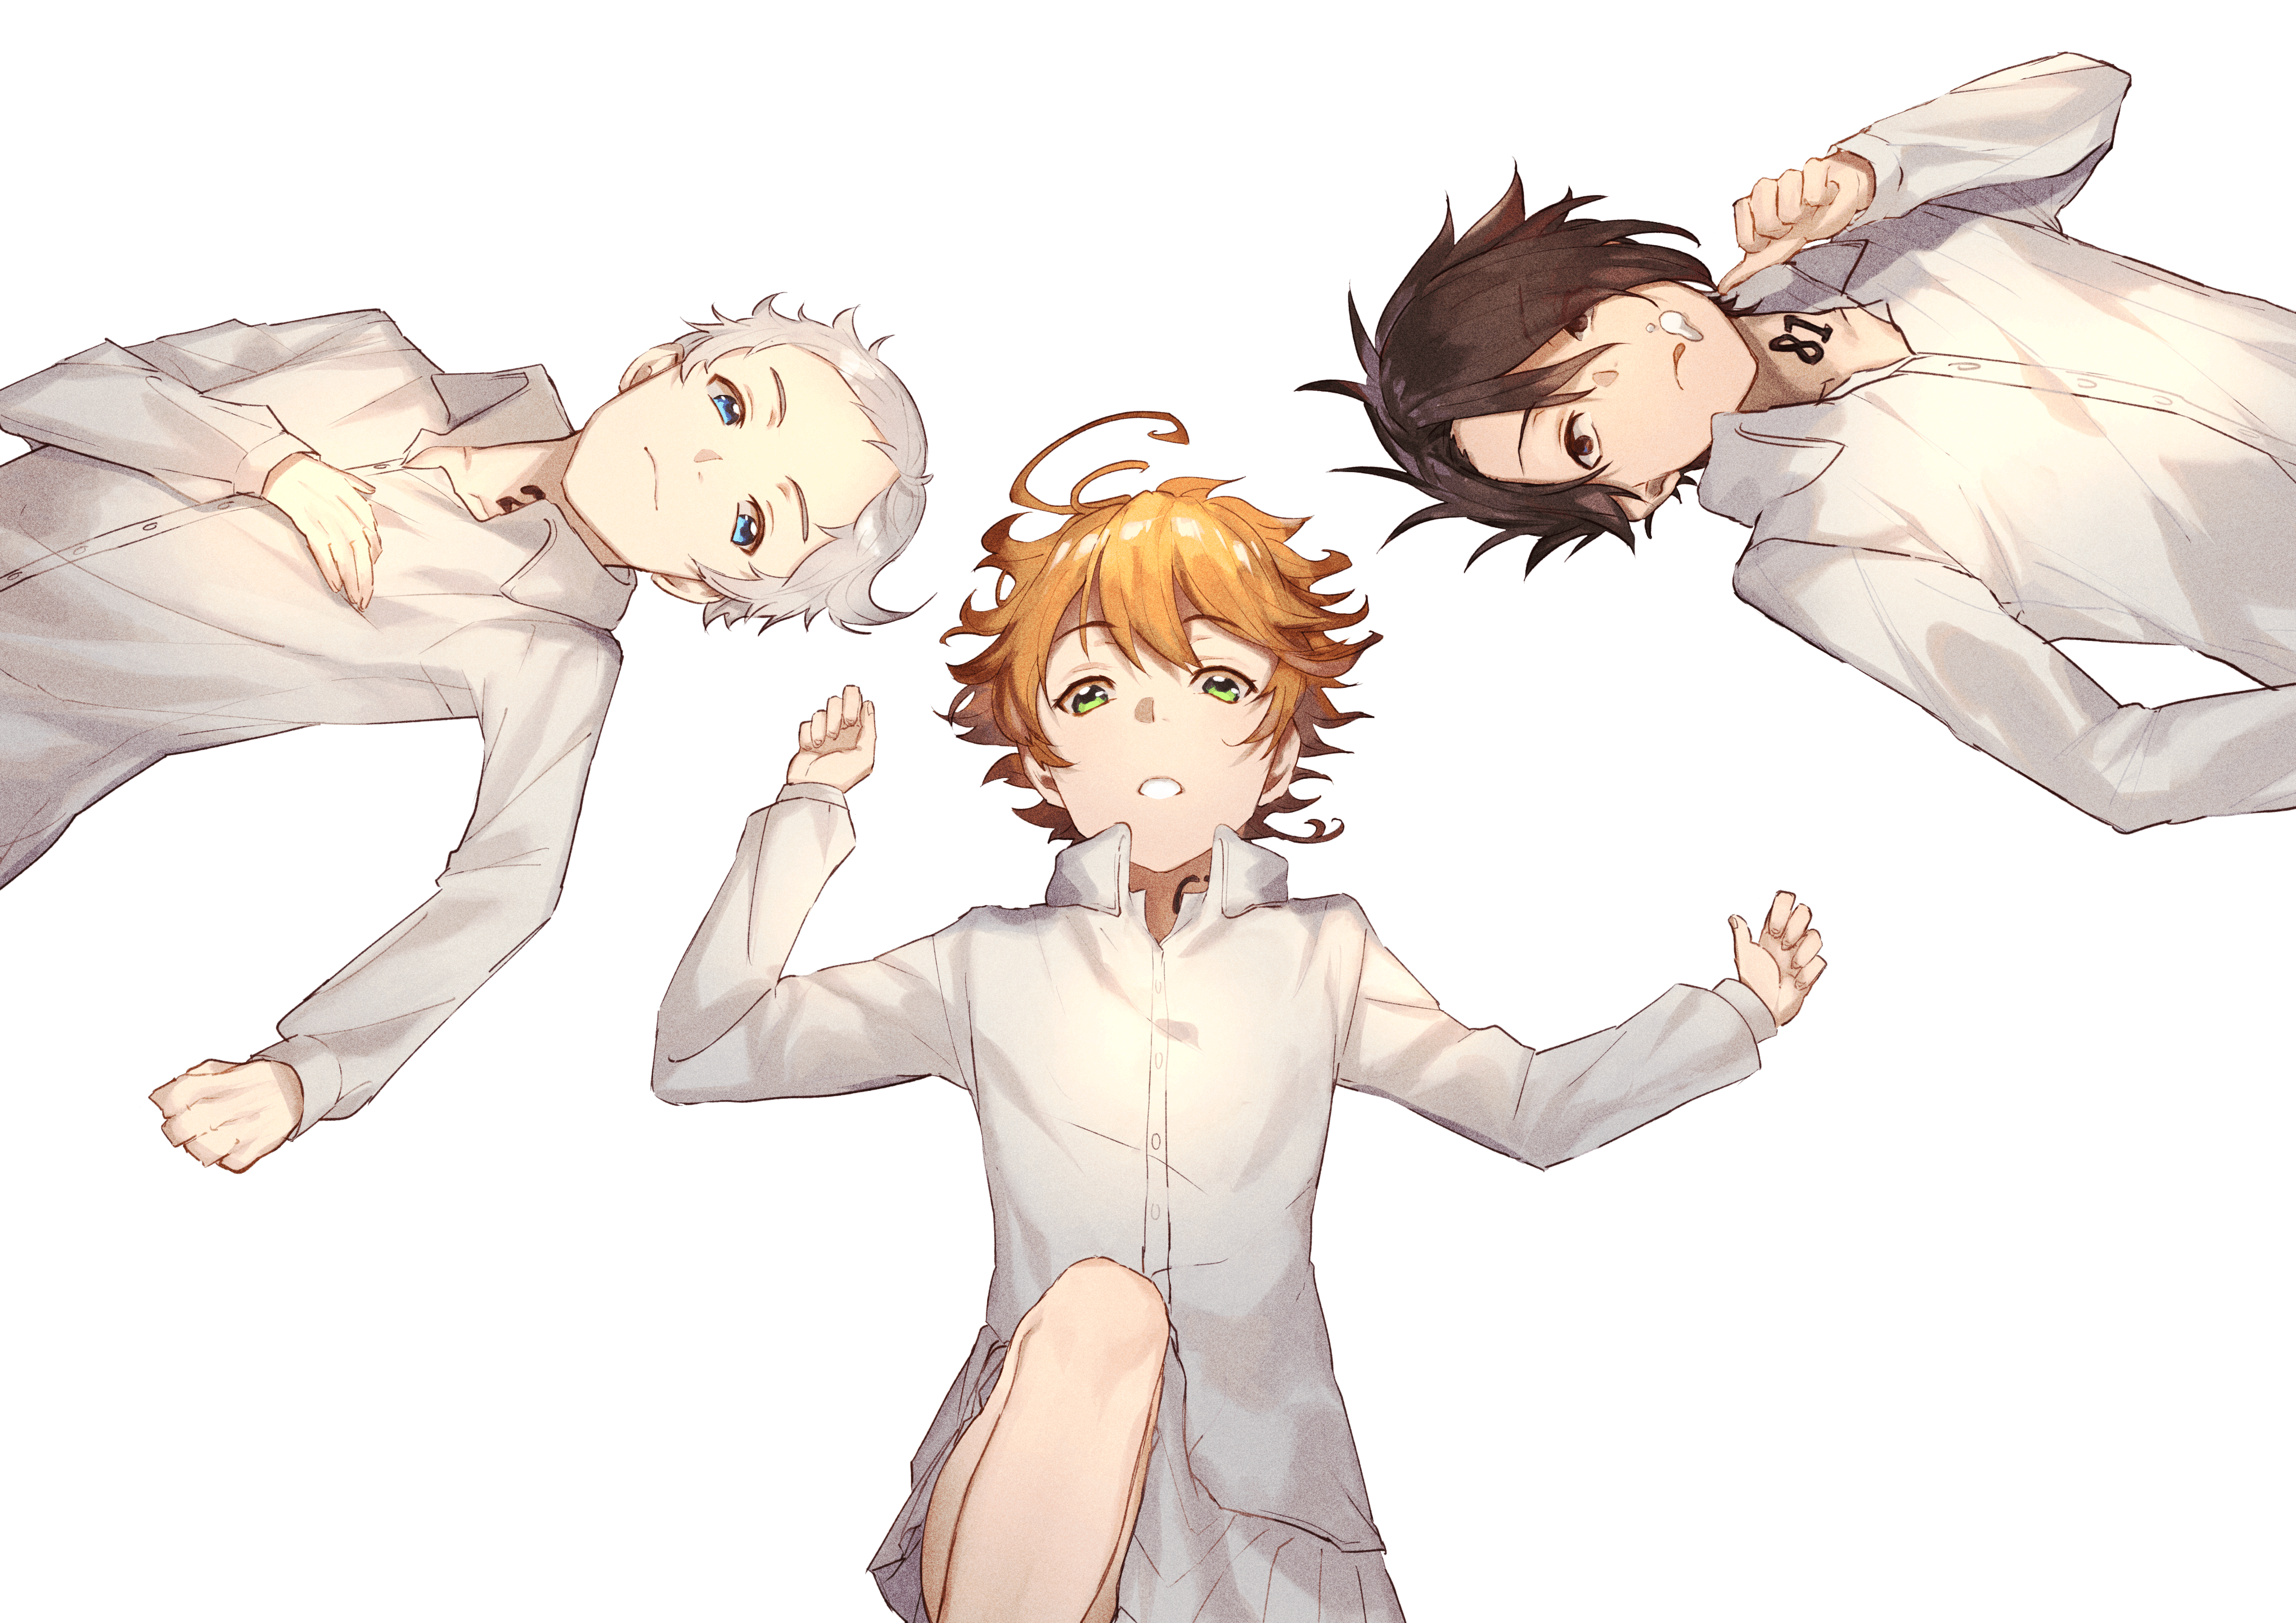 The Promised Neverland 4k Ultra HD Wallpaper. Background Image